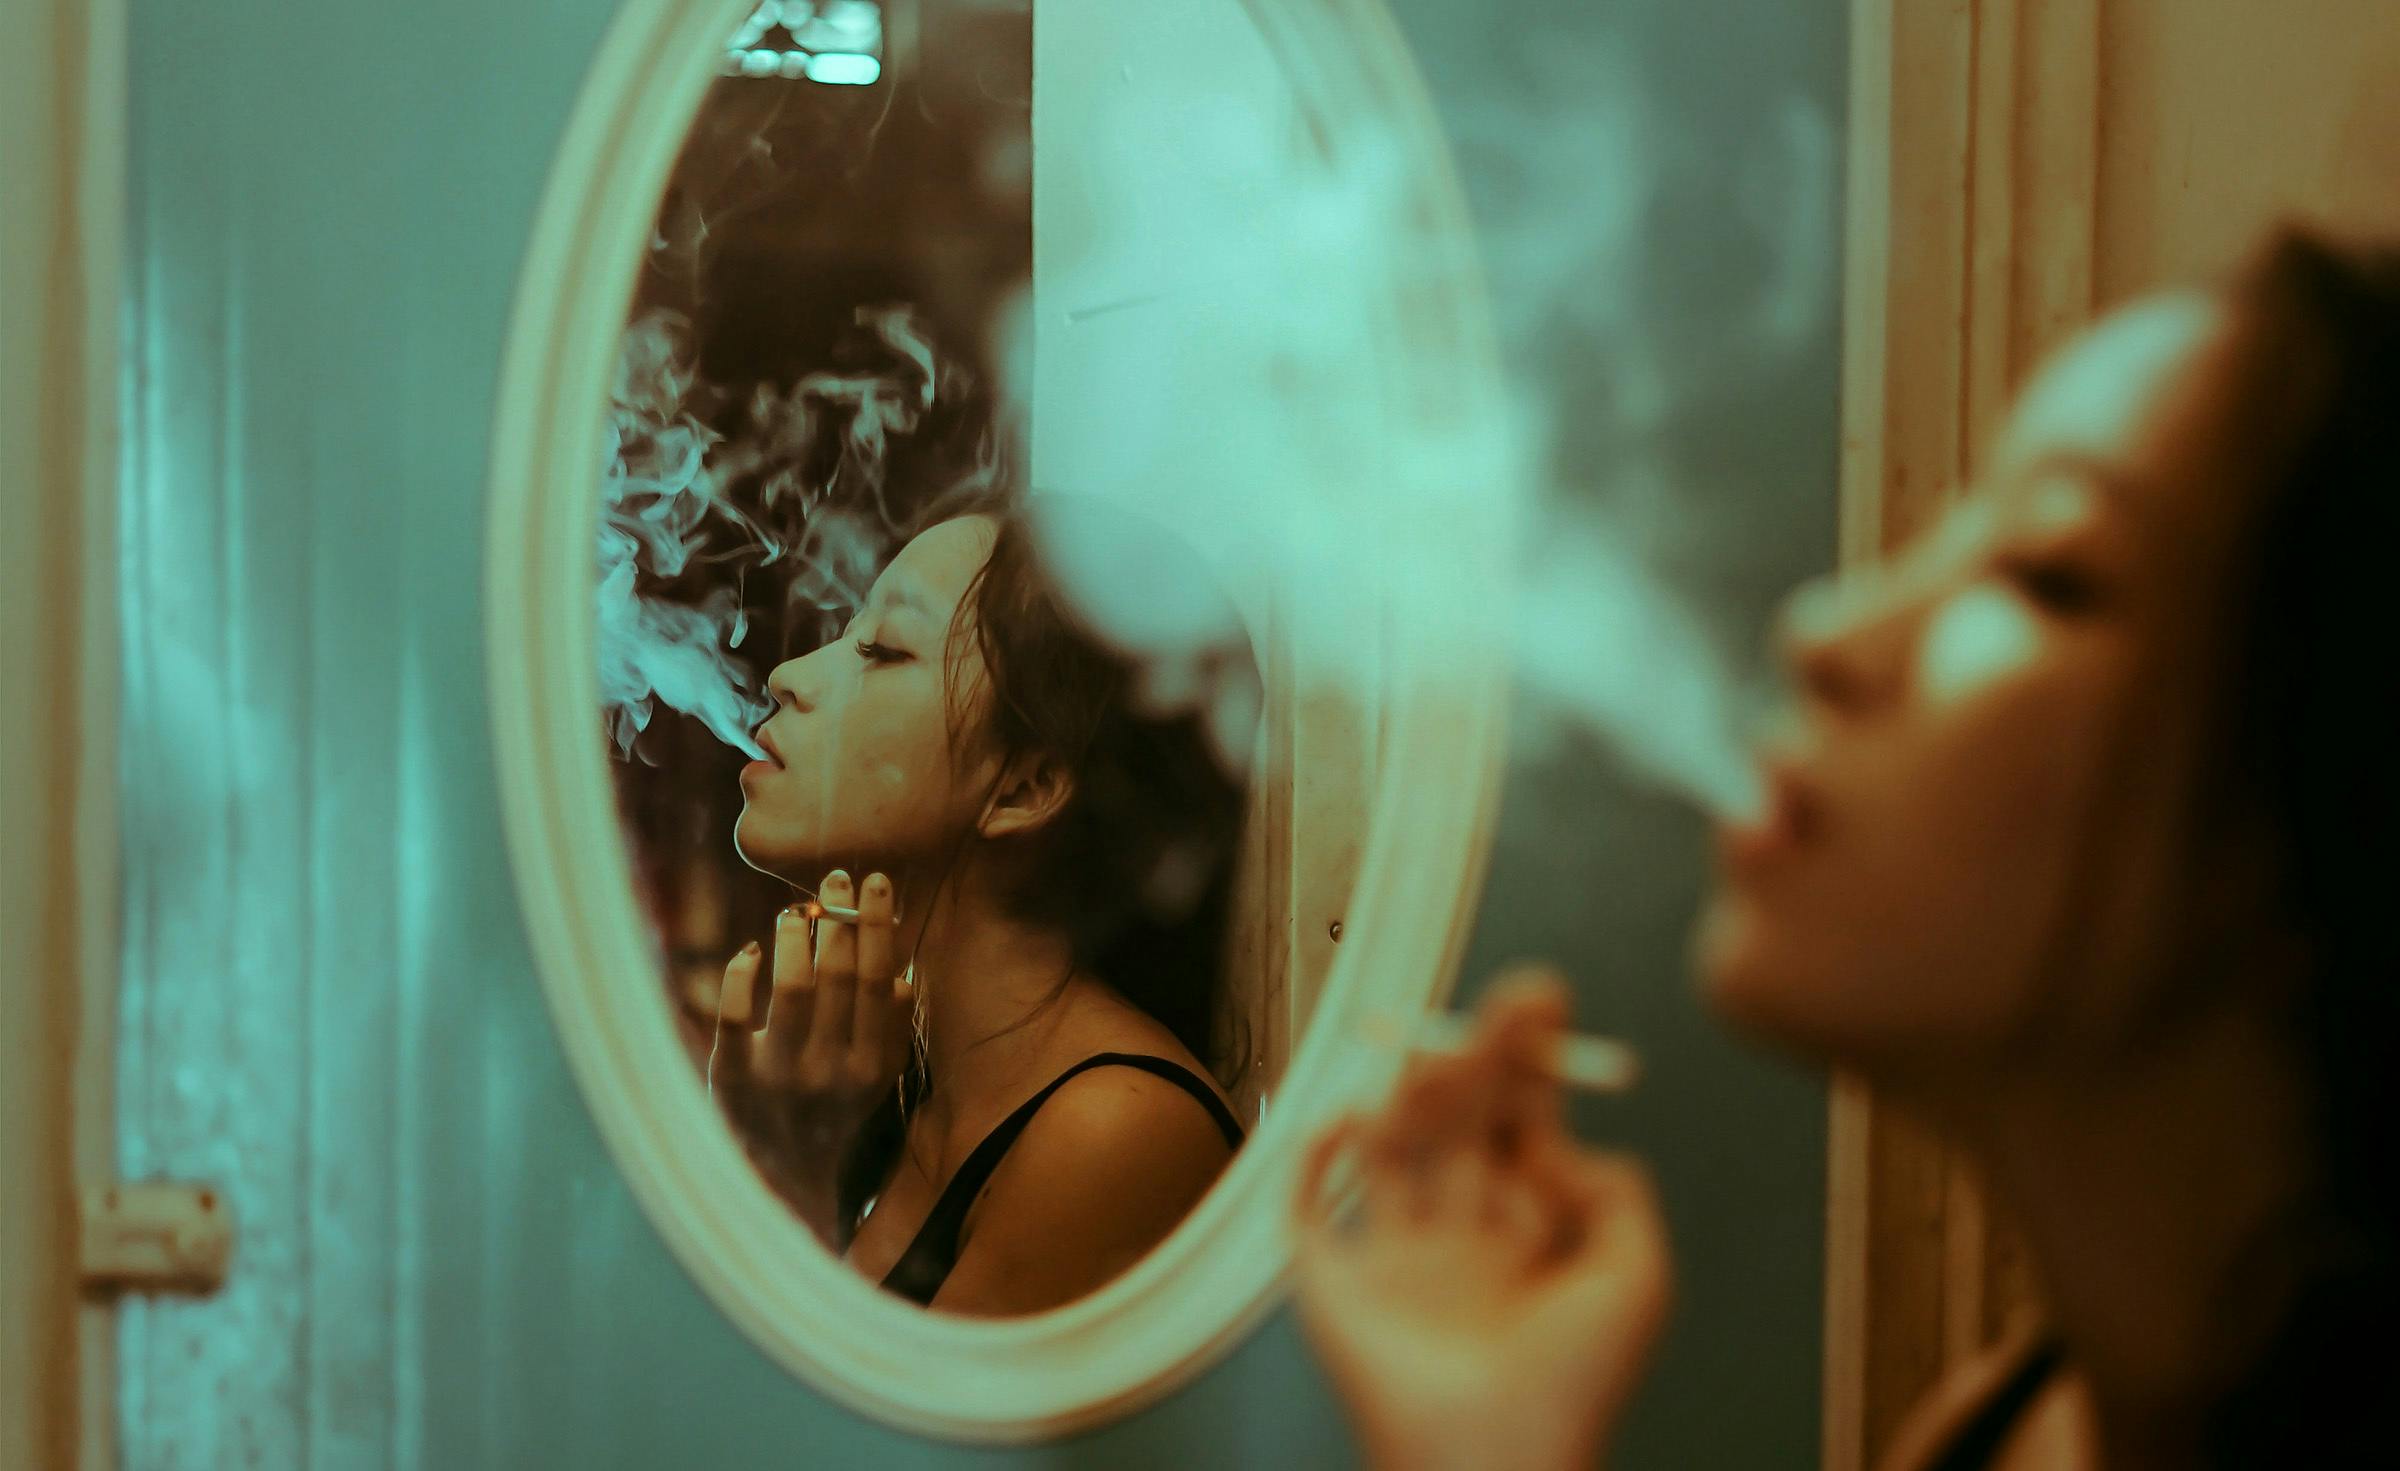 reflection in a mirror of a woman blowing out cannabis smoke